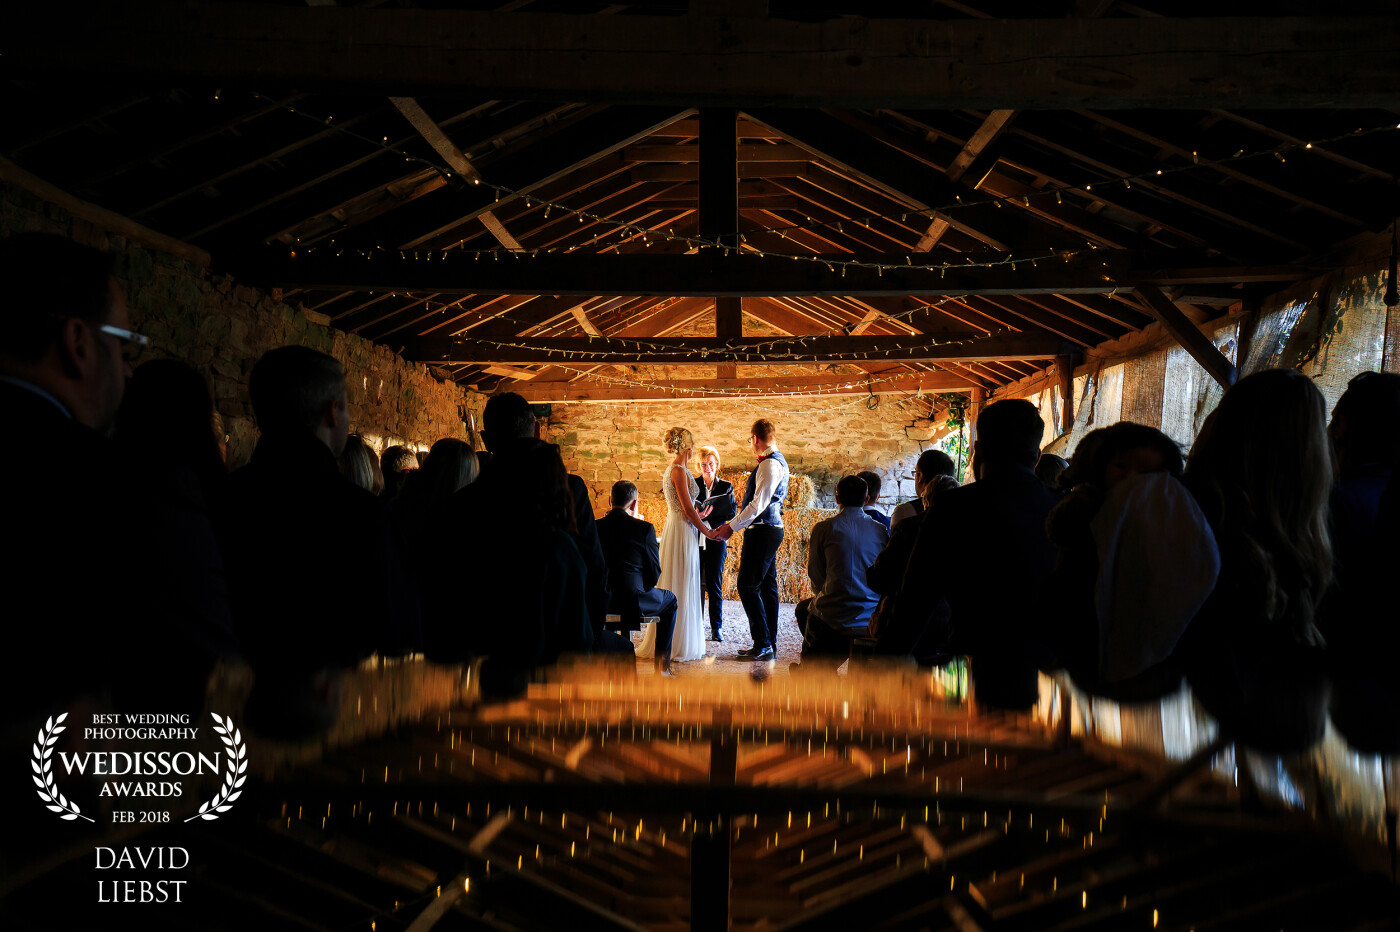 This rustic barn wedding took place on the 23rd of December at Lyde Court in Herefordshire, UK. Loved the day and the challenges that a dark and atmospheric venue provide! The wedding had a Christmas theme so used a mirror to bounce some warmth back into the foreground. 